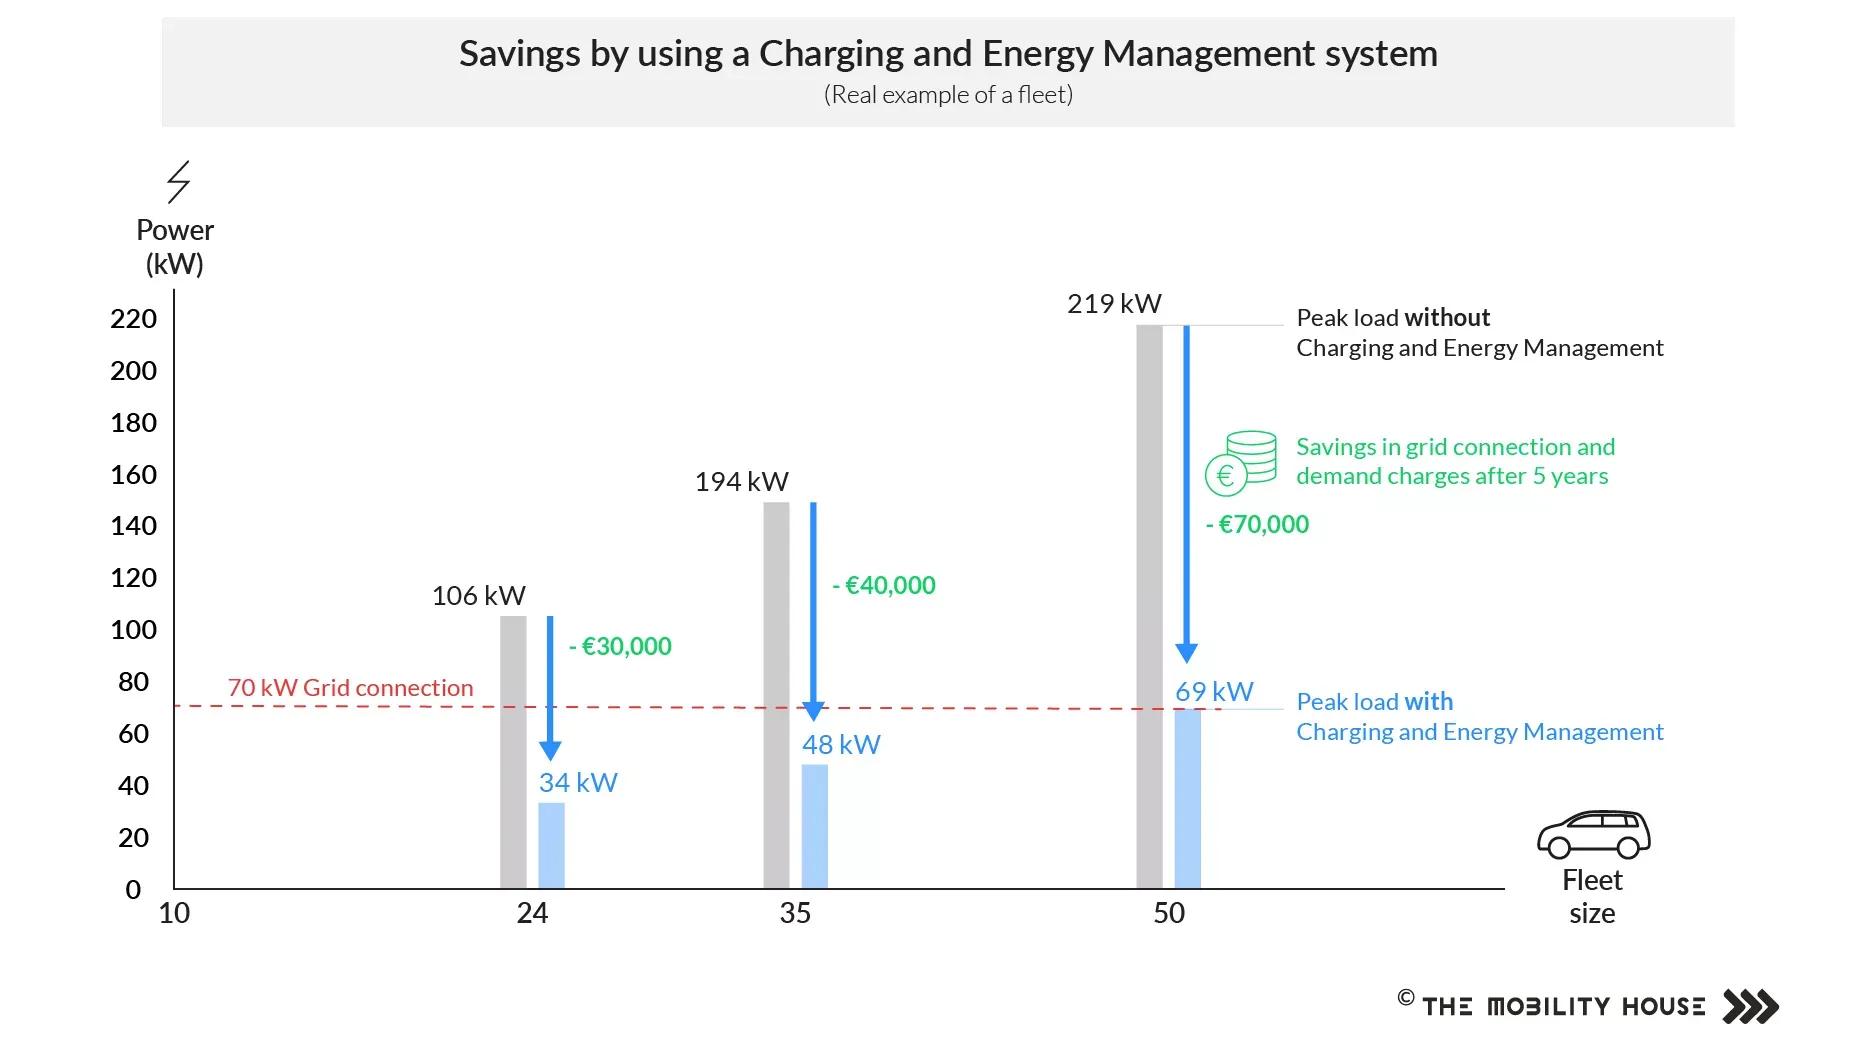 Graphic: Savings of a charging and energy management system